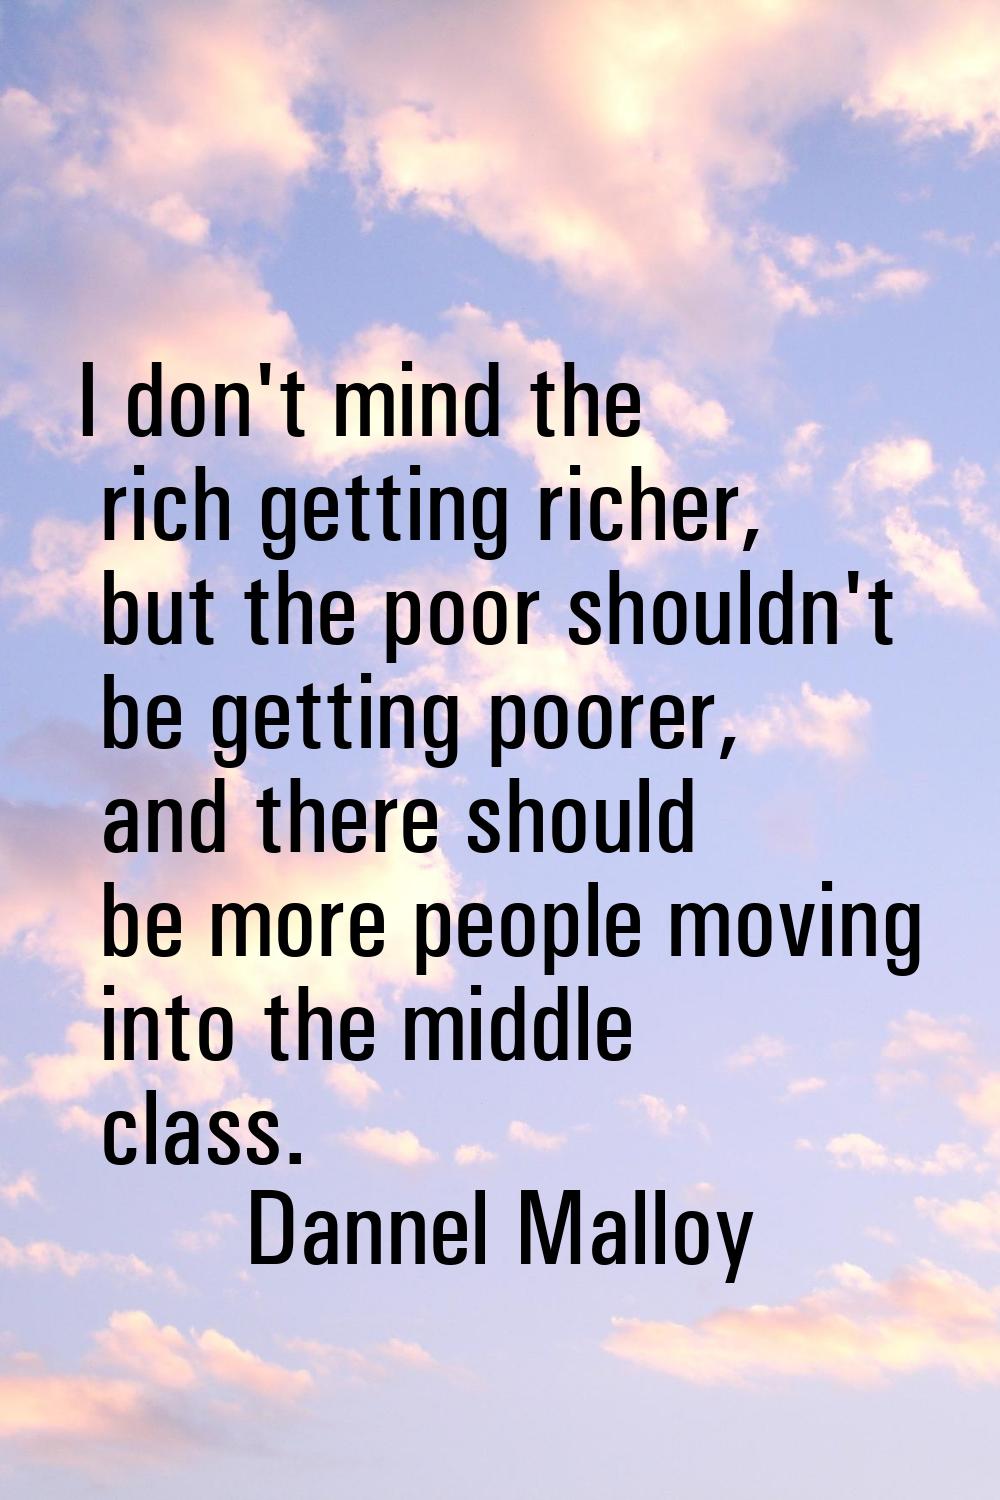 I don't mind the rich getting richer, but the poor shouldn't be getting poorer, and there should be